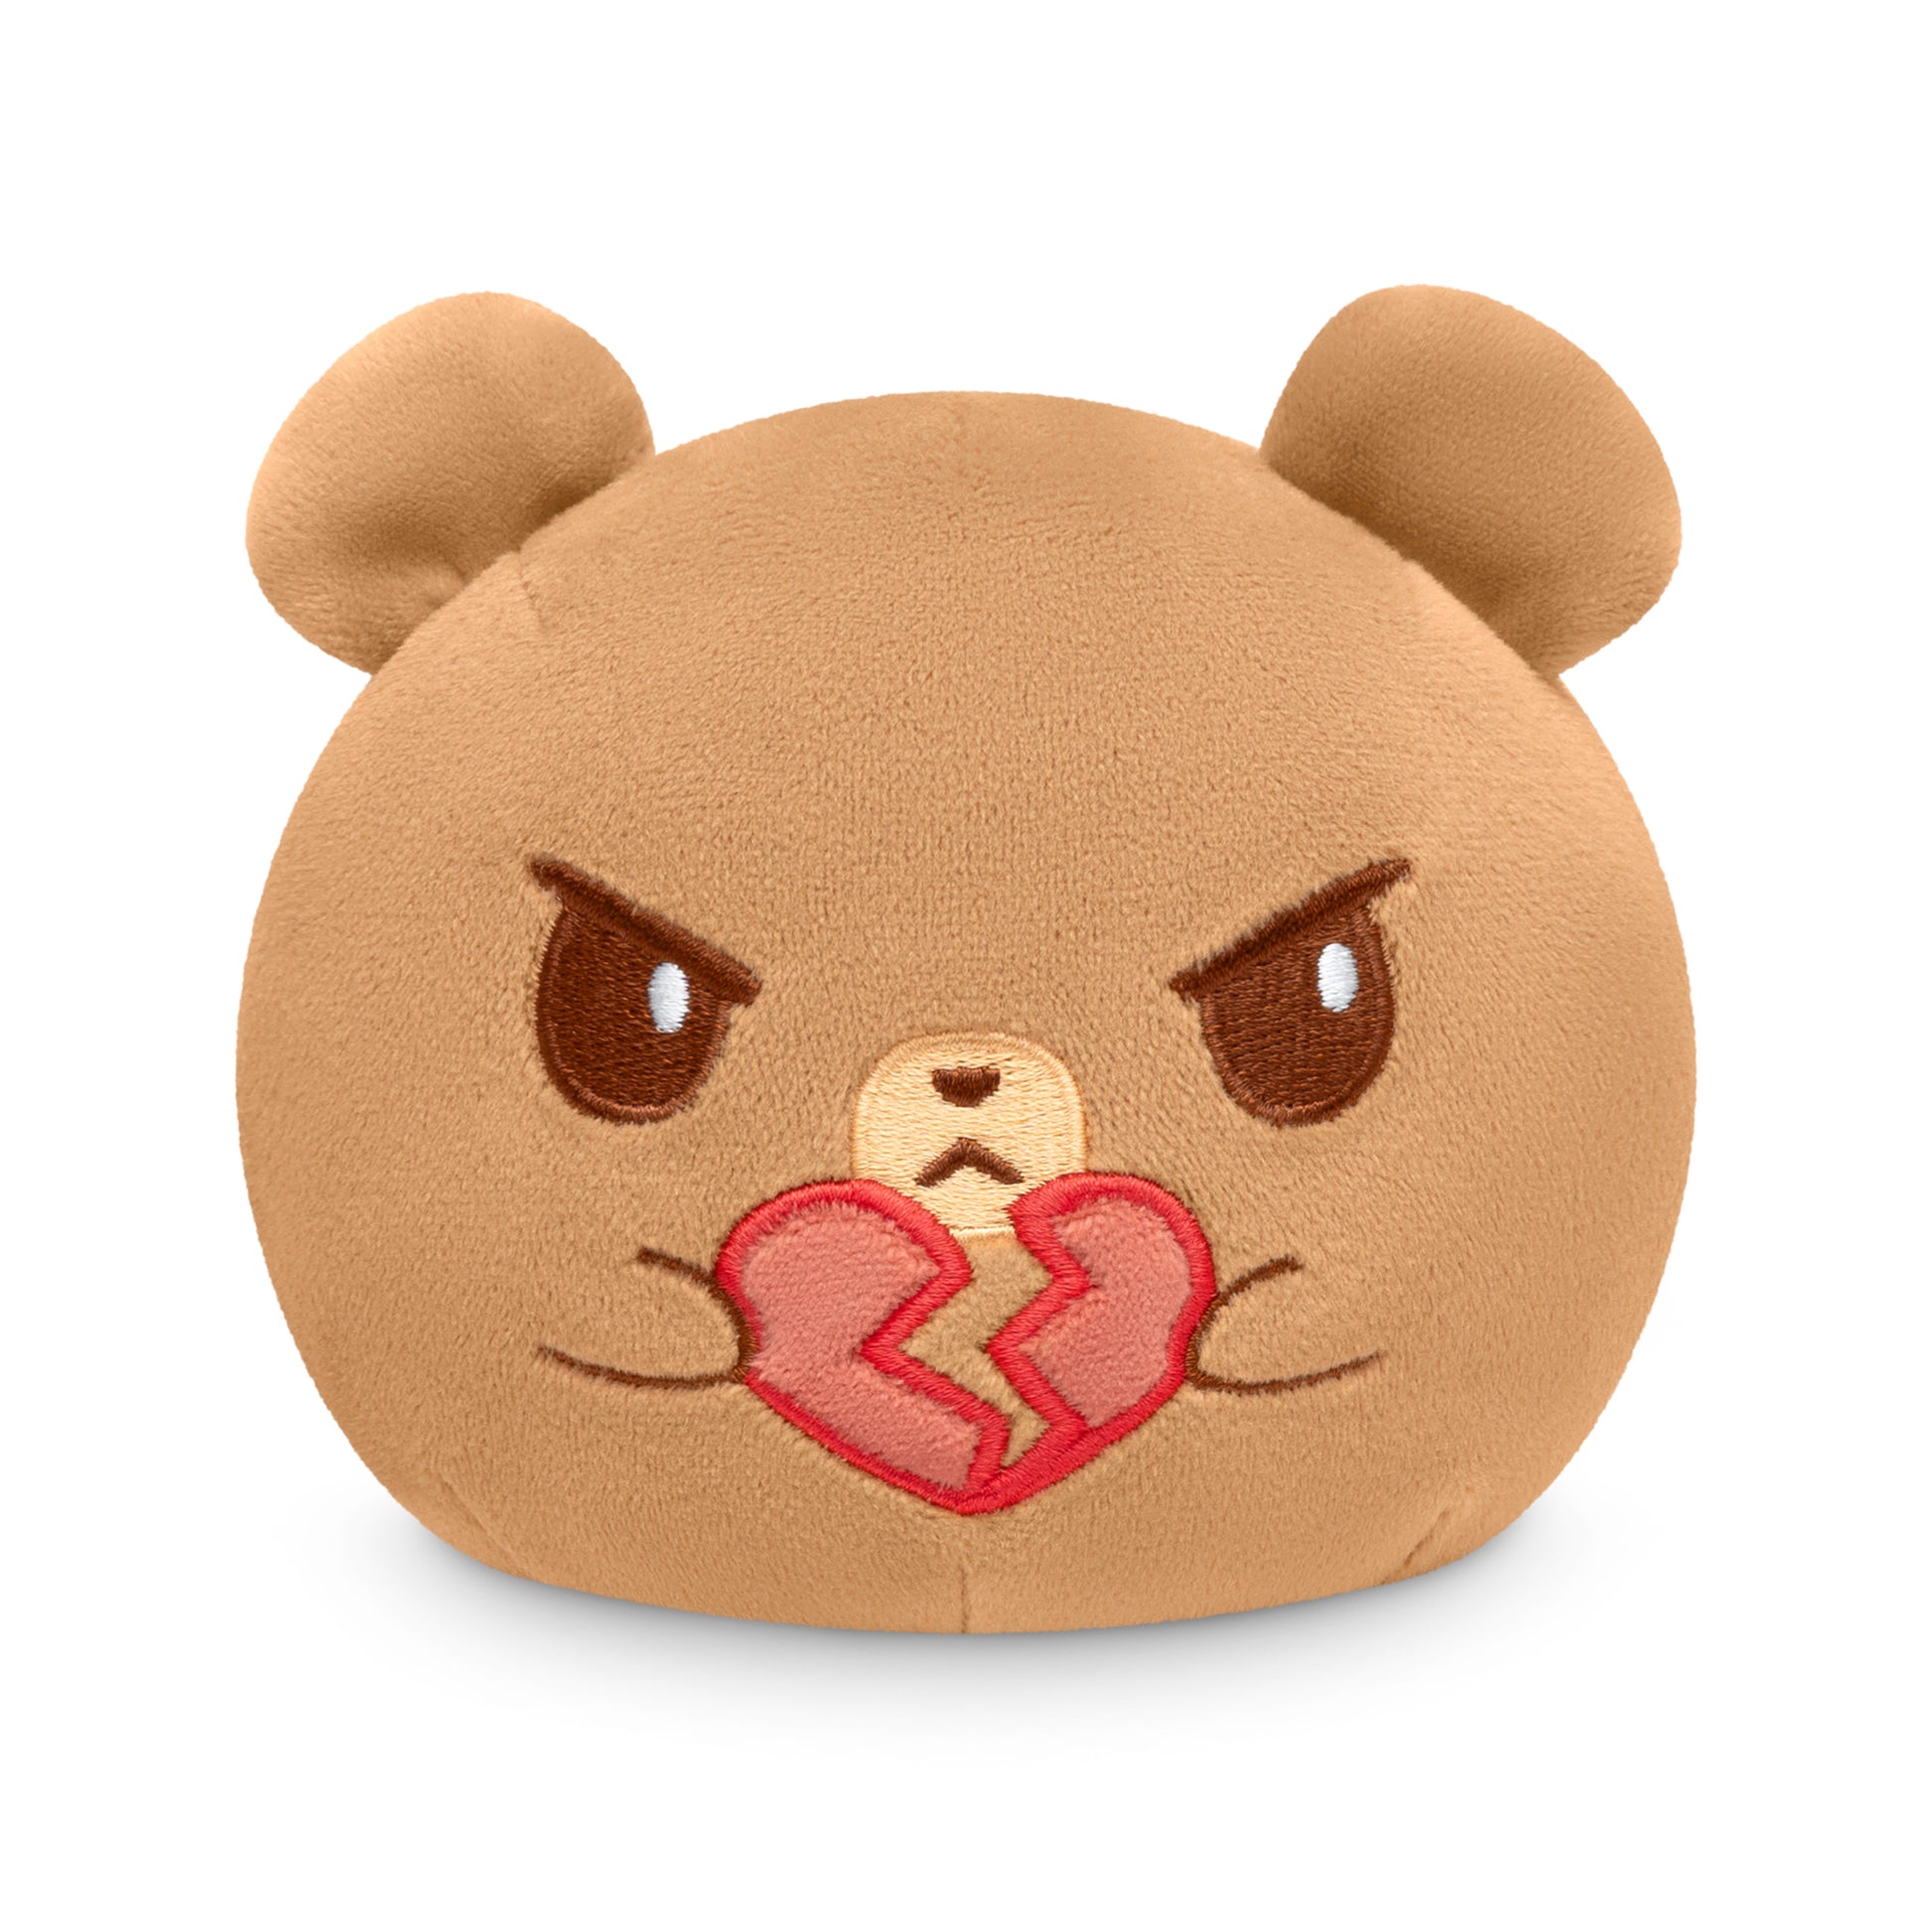 A Valentine's Day Plushiverse Unbearably Cute 4" Reversible Plushie, a brown teddy bear with a broken heart, by TeeTurtle.